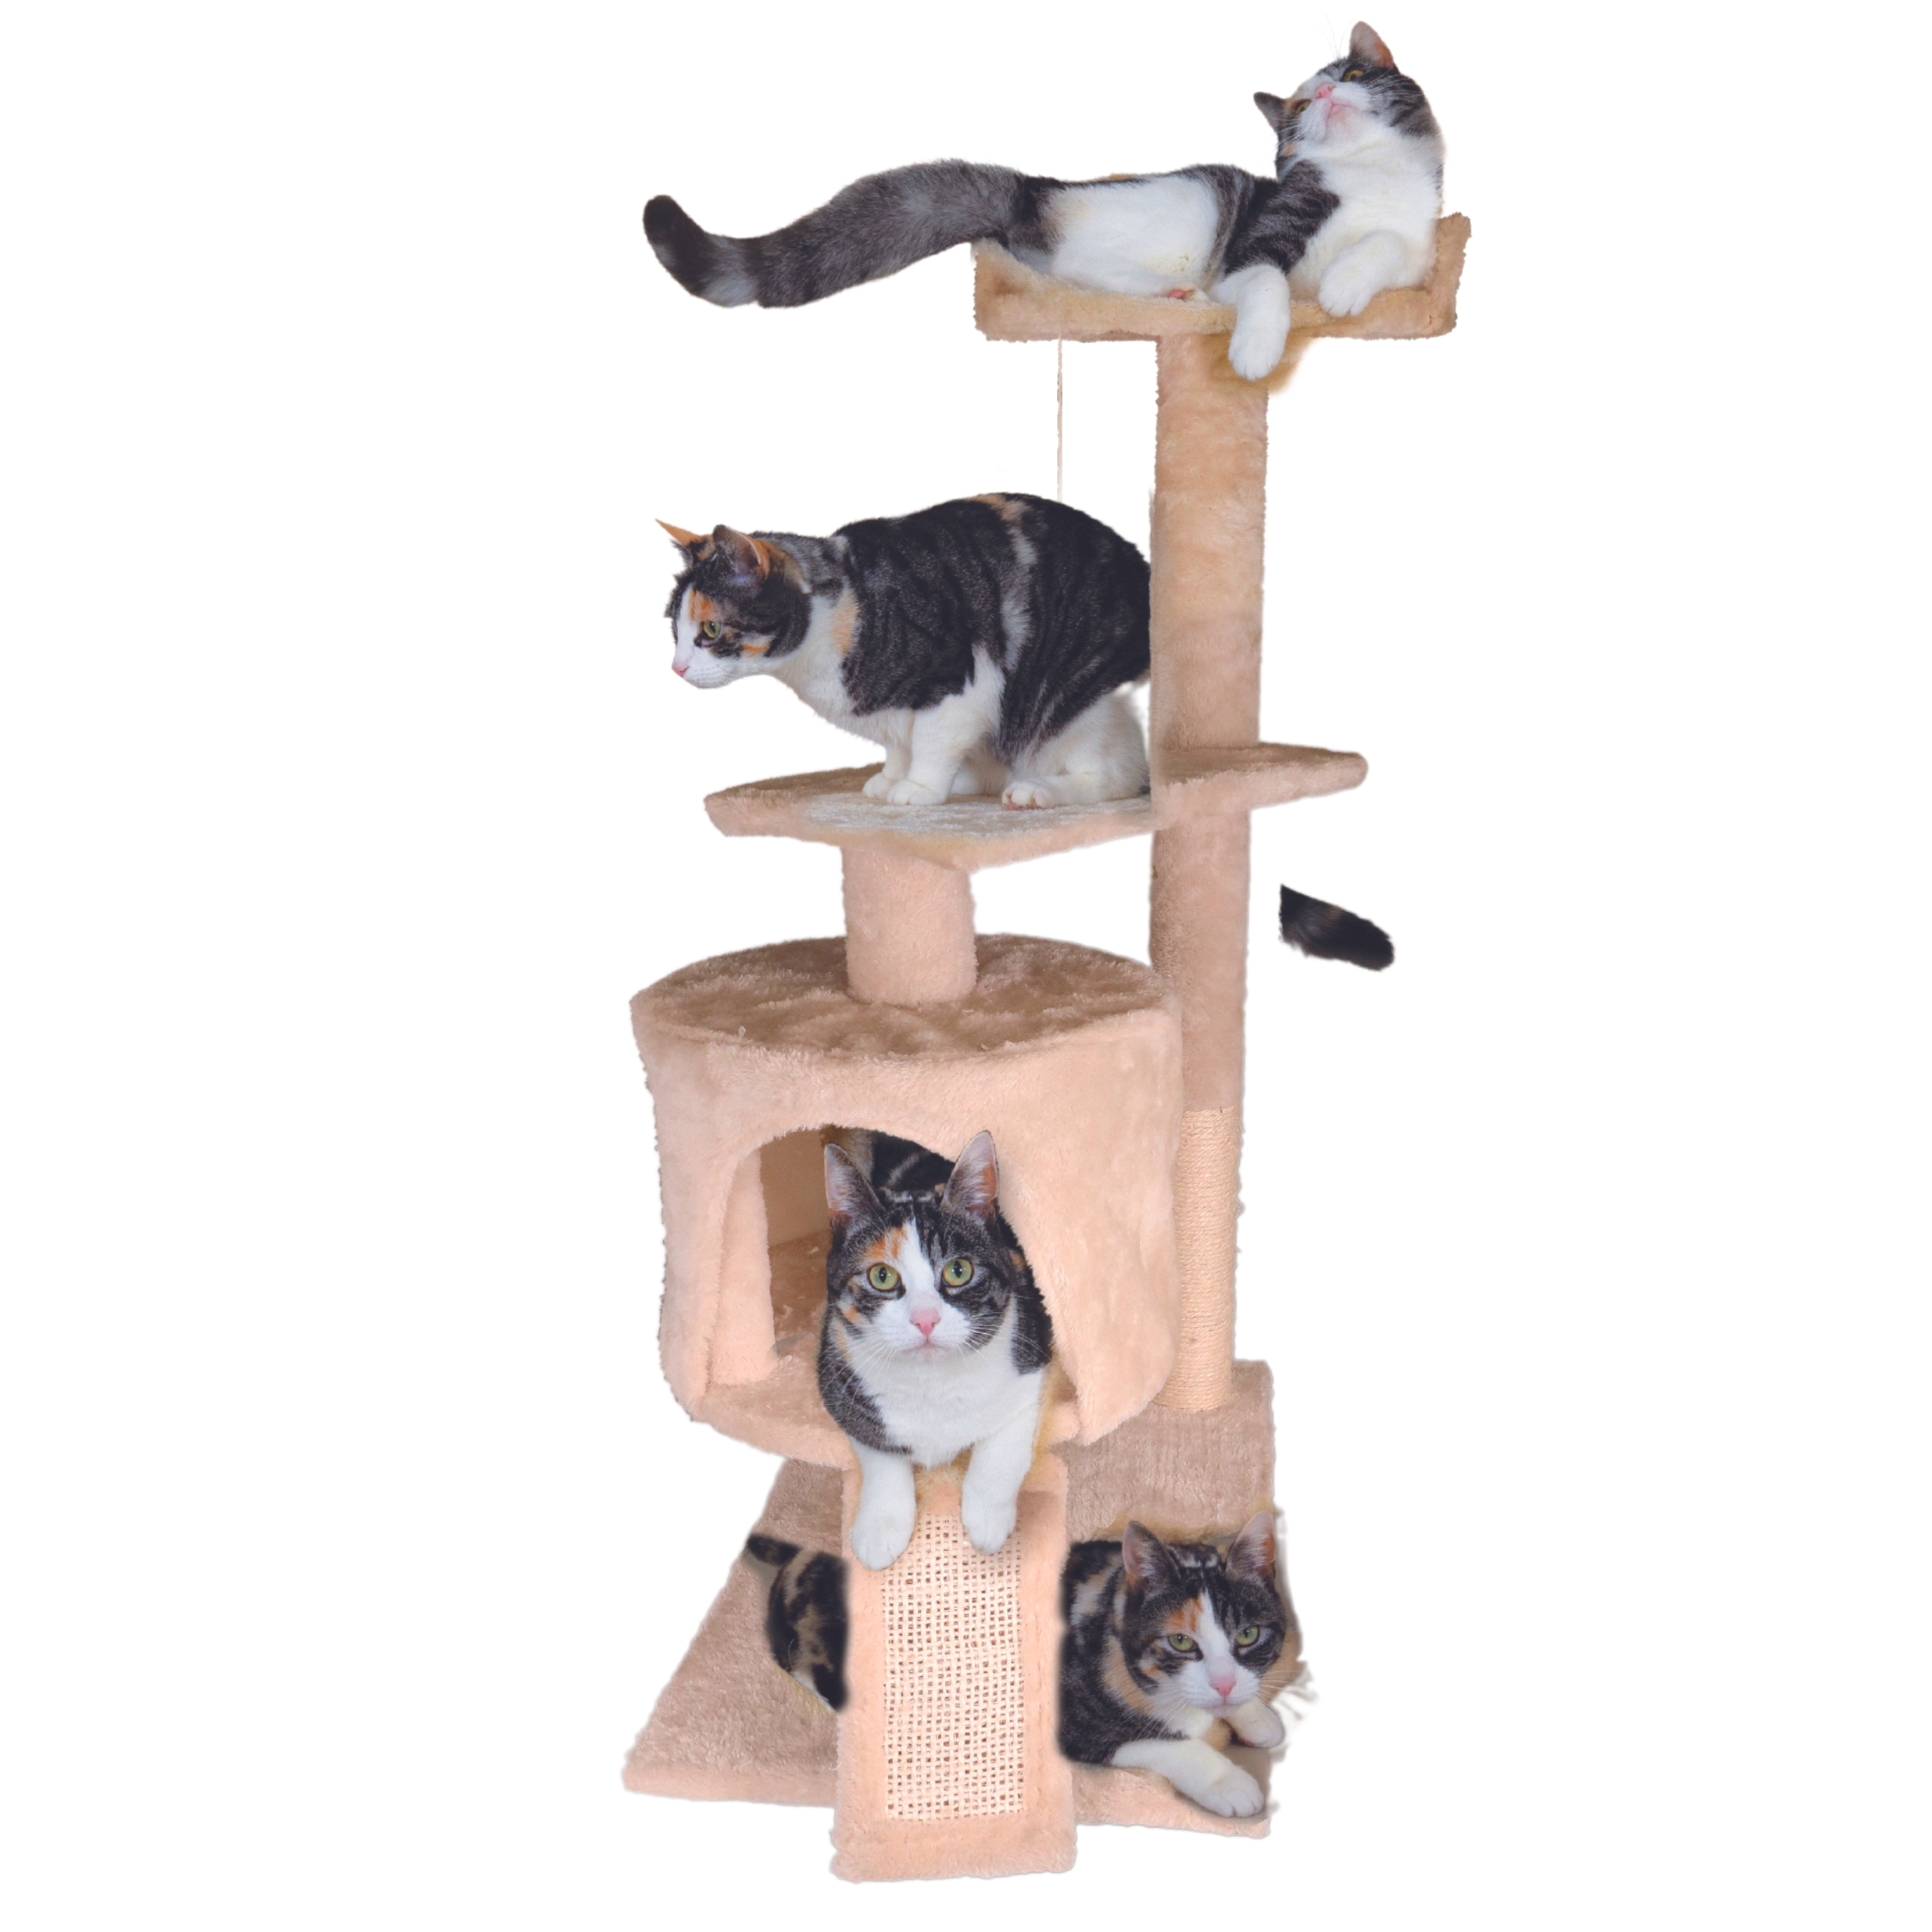 Cat playing in cat tower